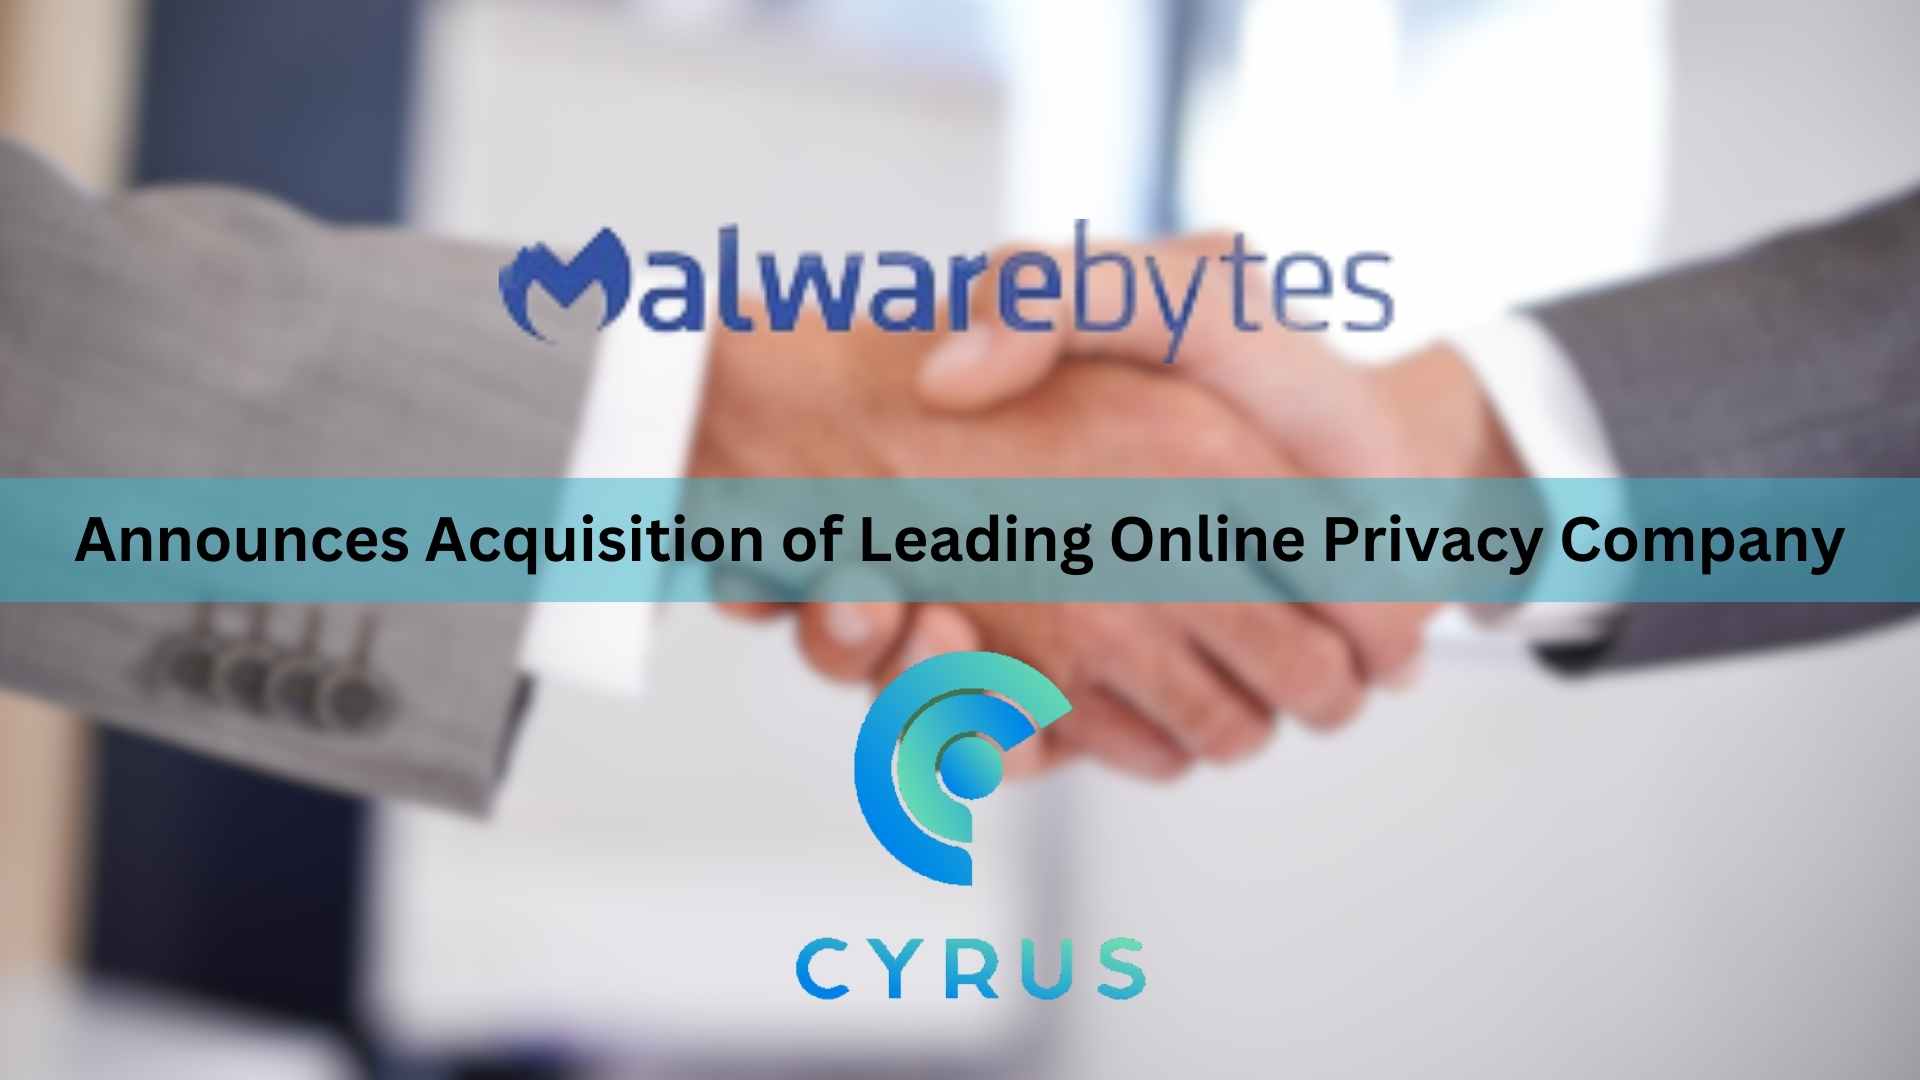 Malwarebytes Announces Acquisition of Leading Online Privacy Company Cyrus